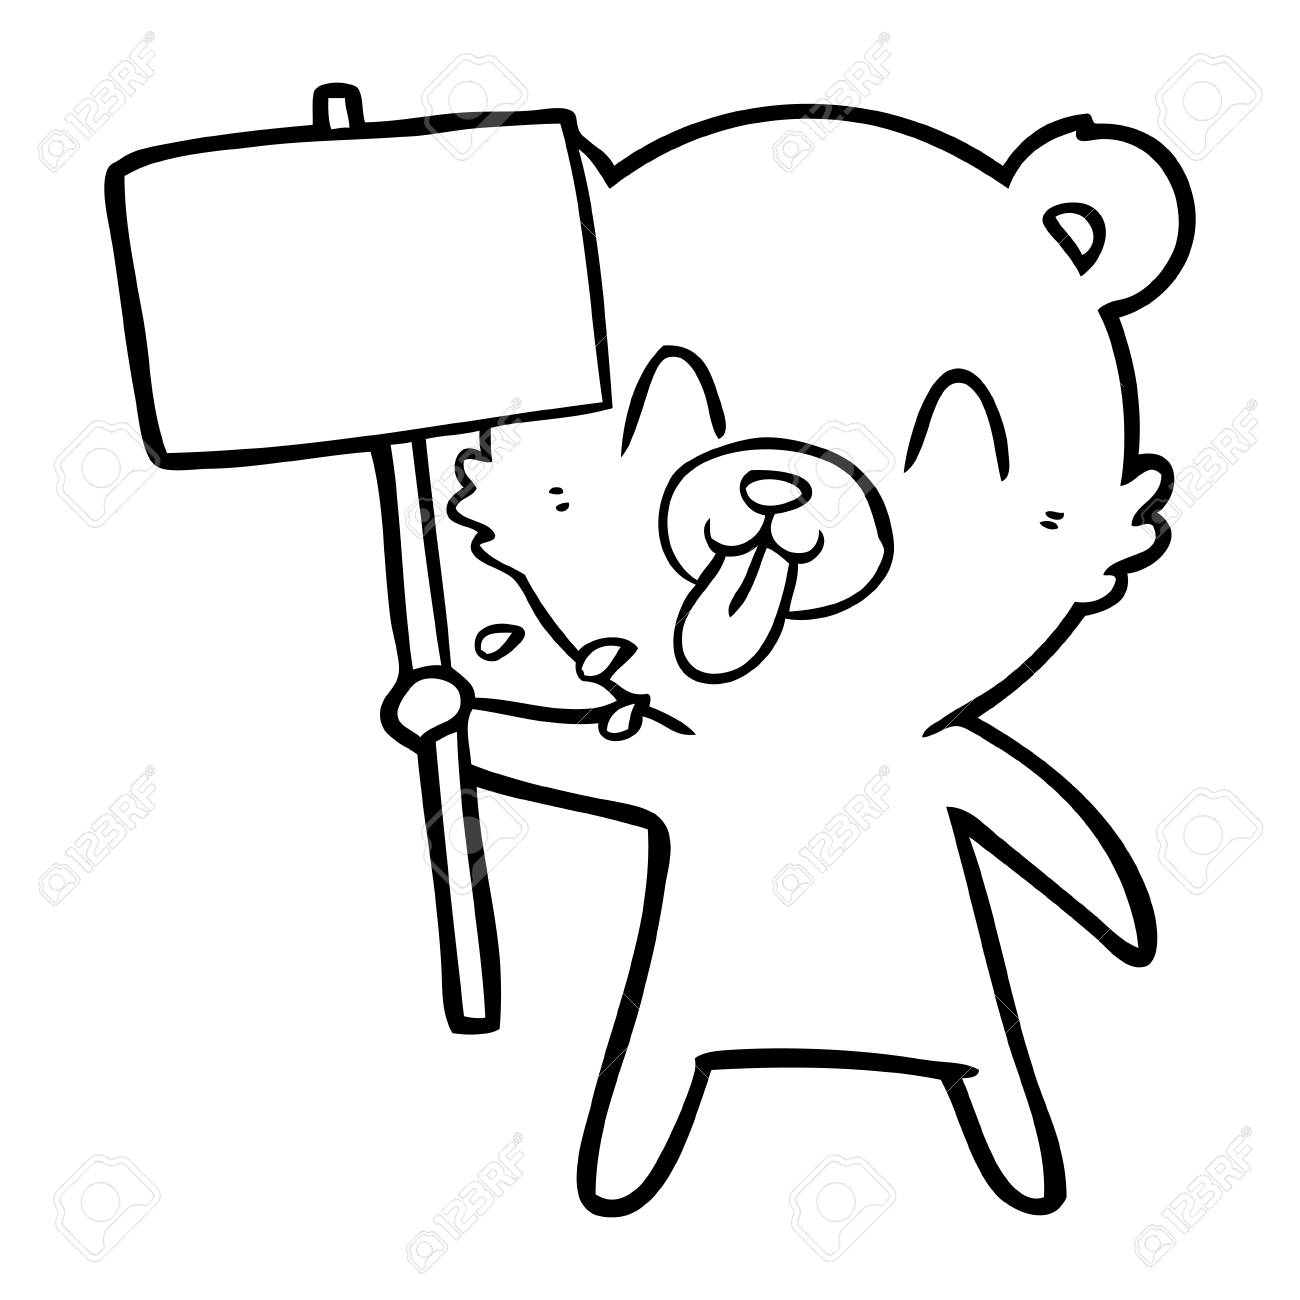 A Rude Cartoon Of Bear With Protest Sign On White Background